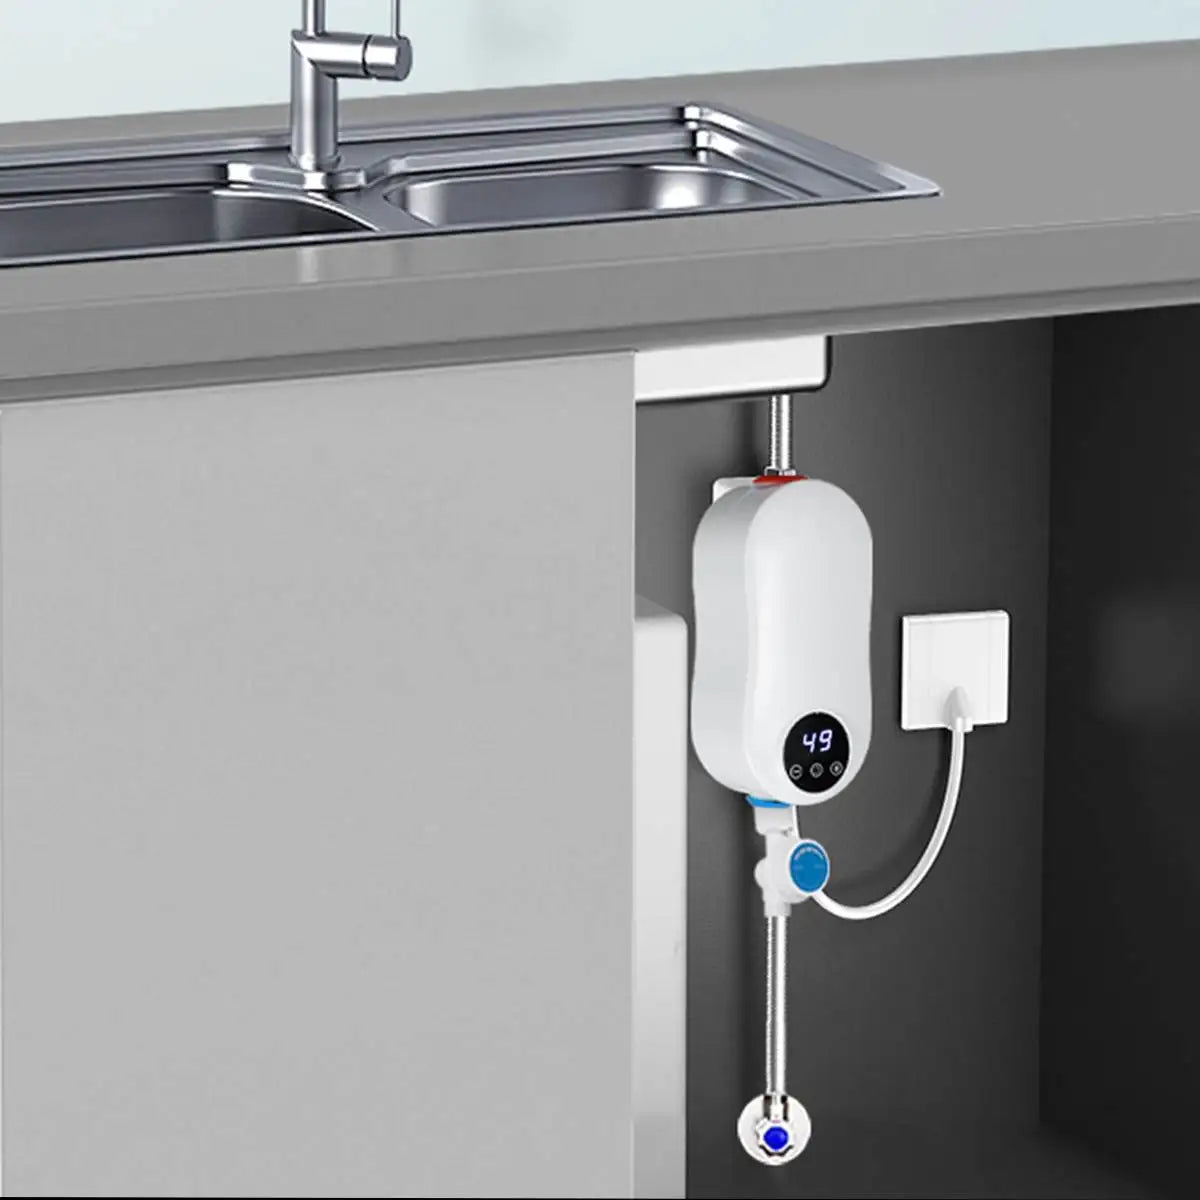 220V 5500W Electric Hot Water Heater Tap